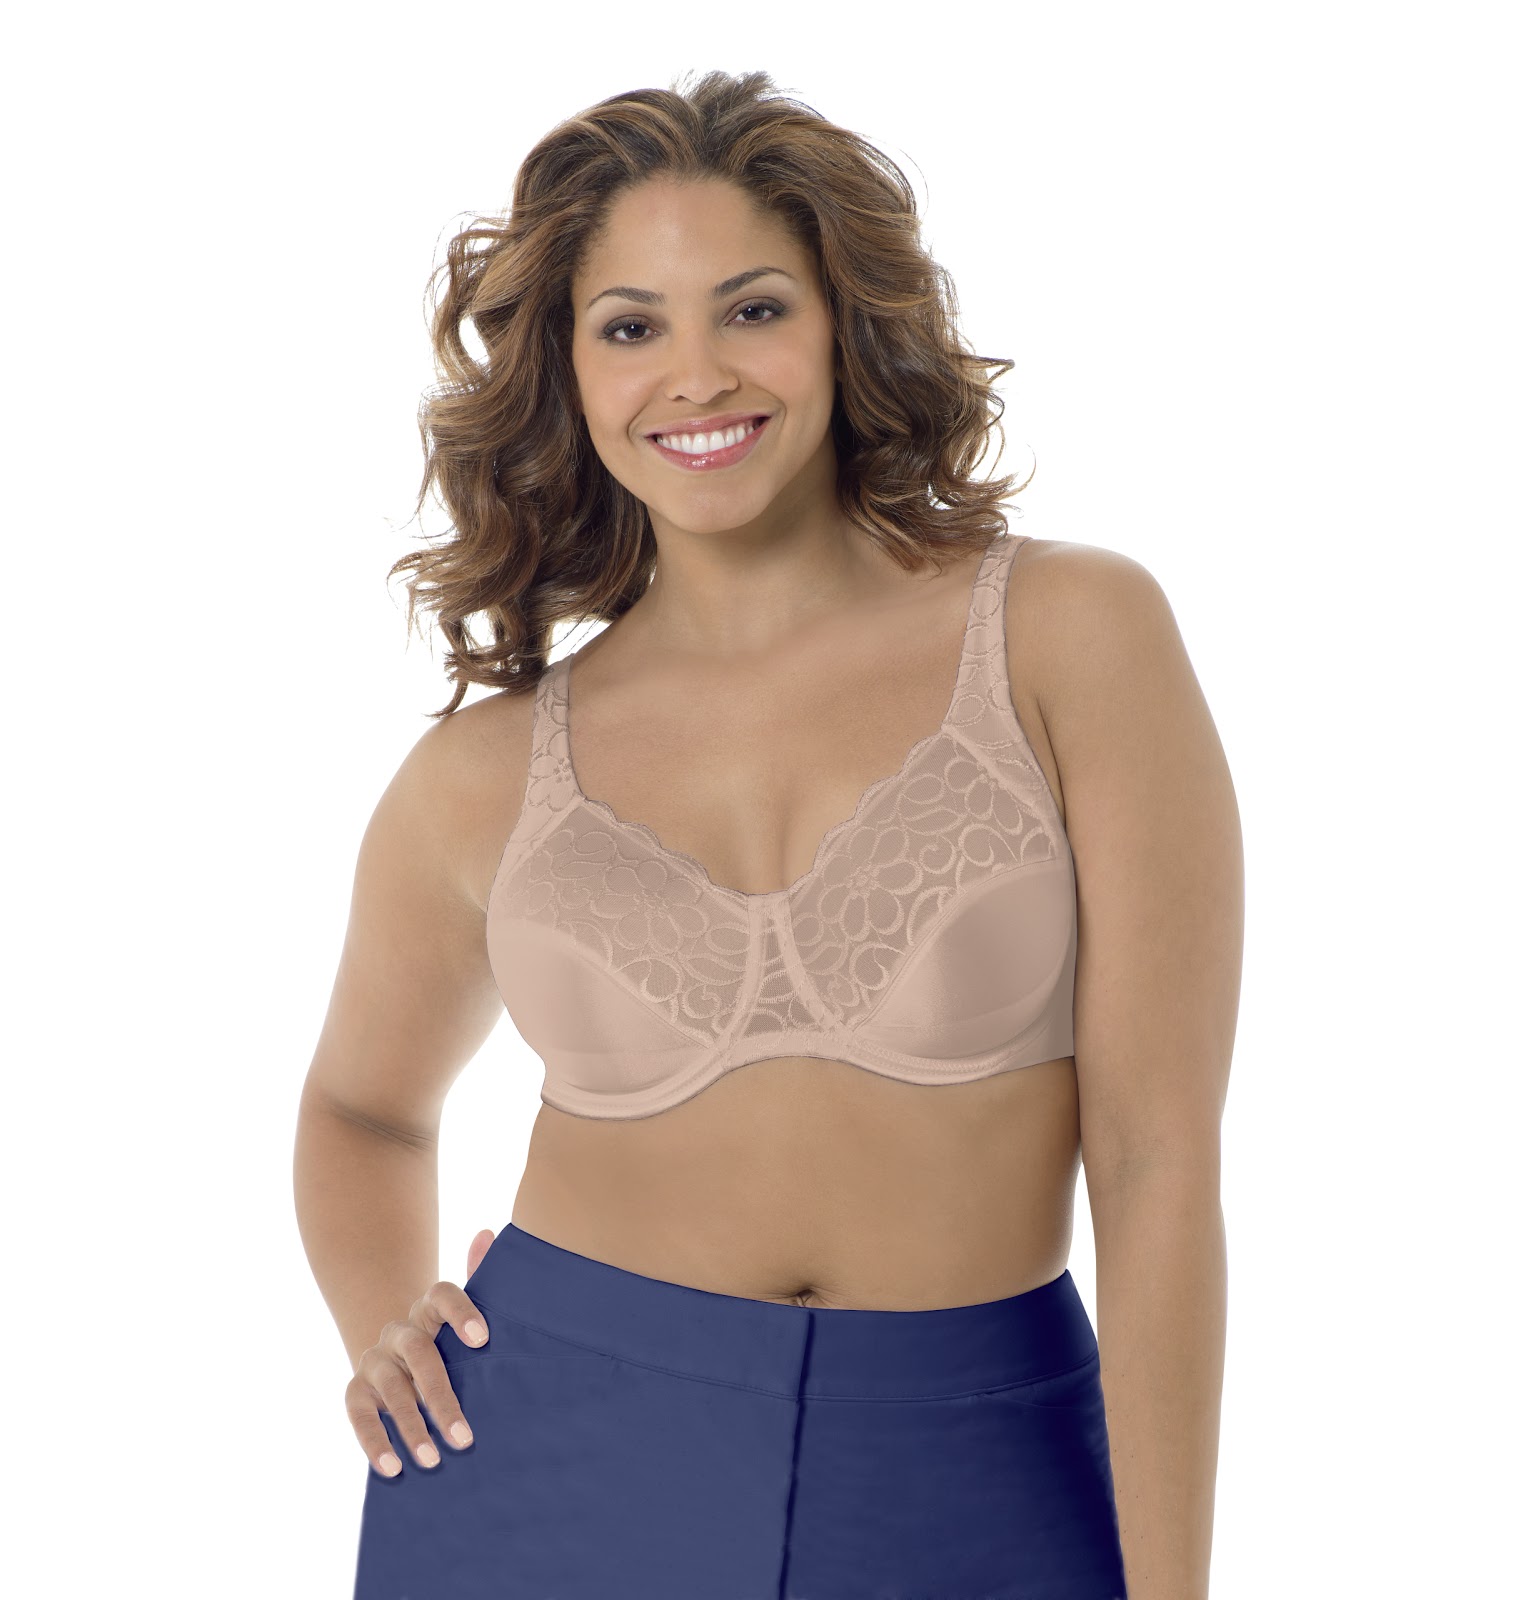 PLAYTEX ELEGANT UPLIFT AND SUPPORT UNDERWIRE BRA REVIEW AND GIVEAWAY -  Stylish Curves